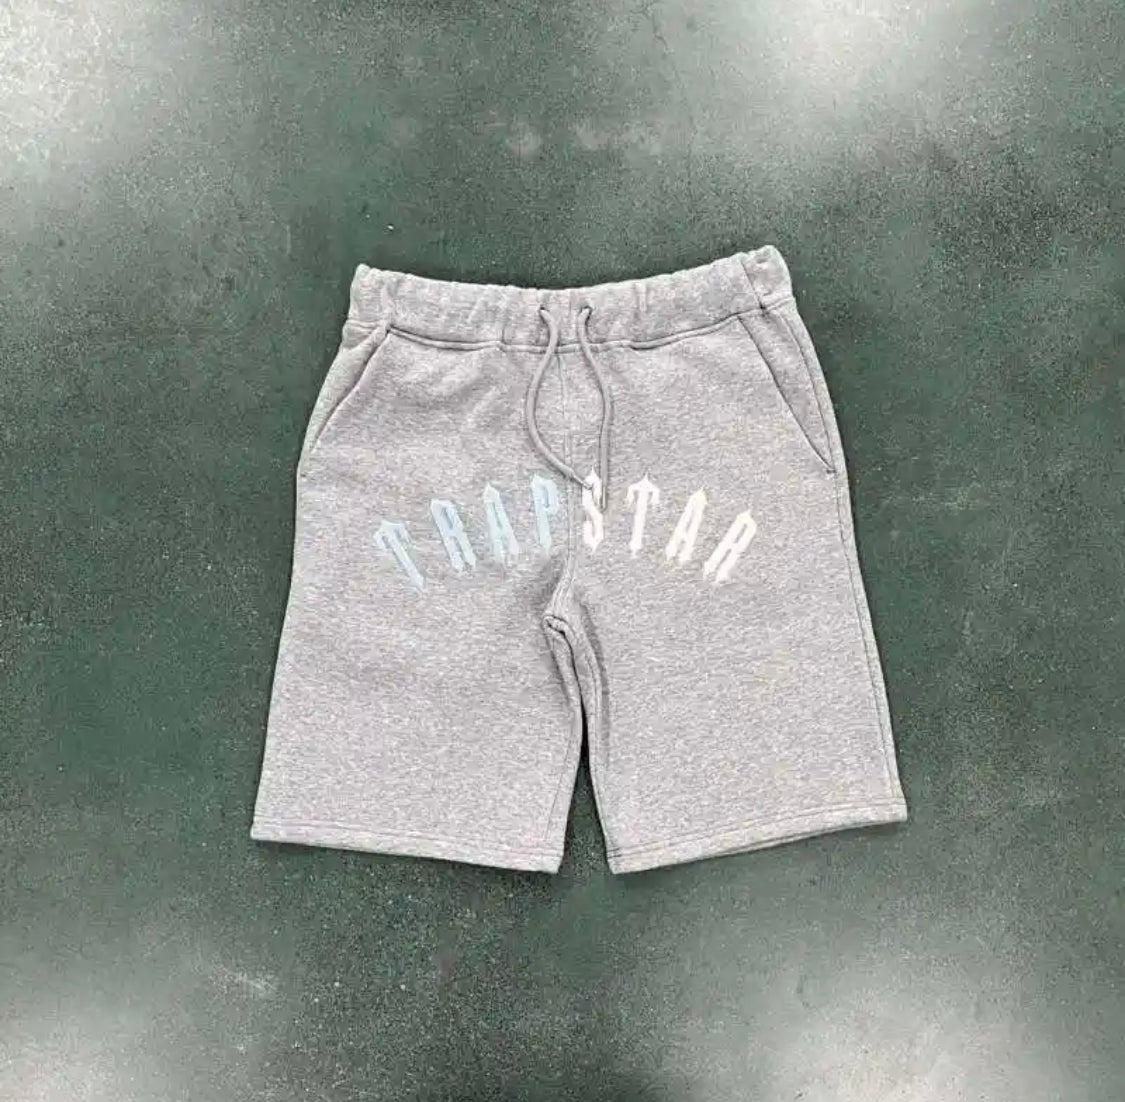 Arch Chenile shorts and tee - Grey Ice